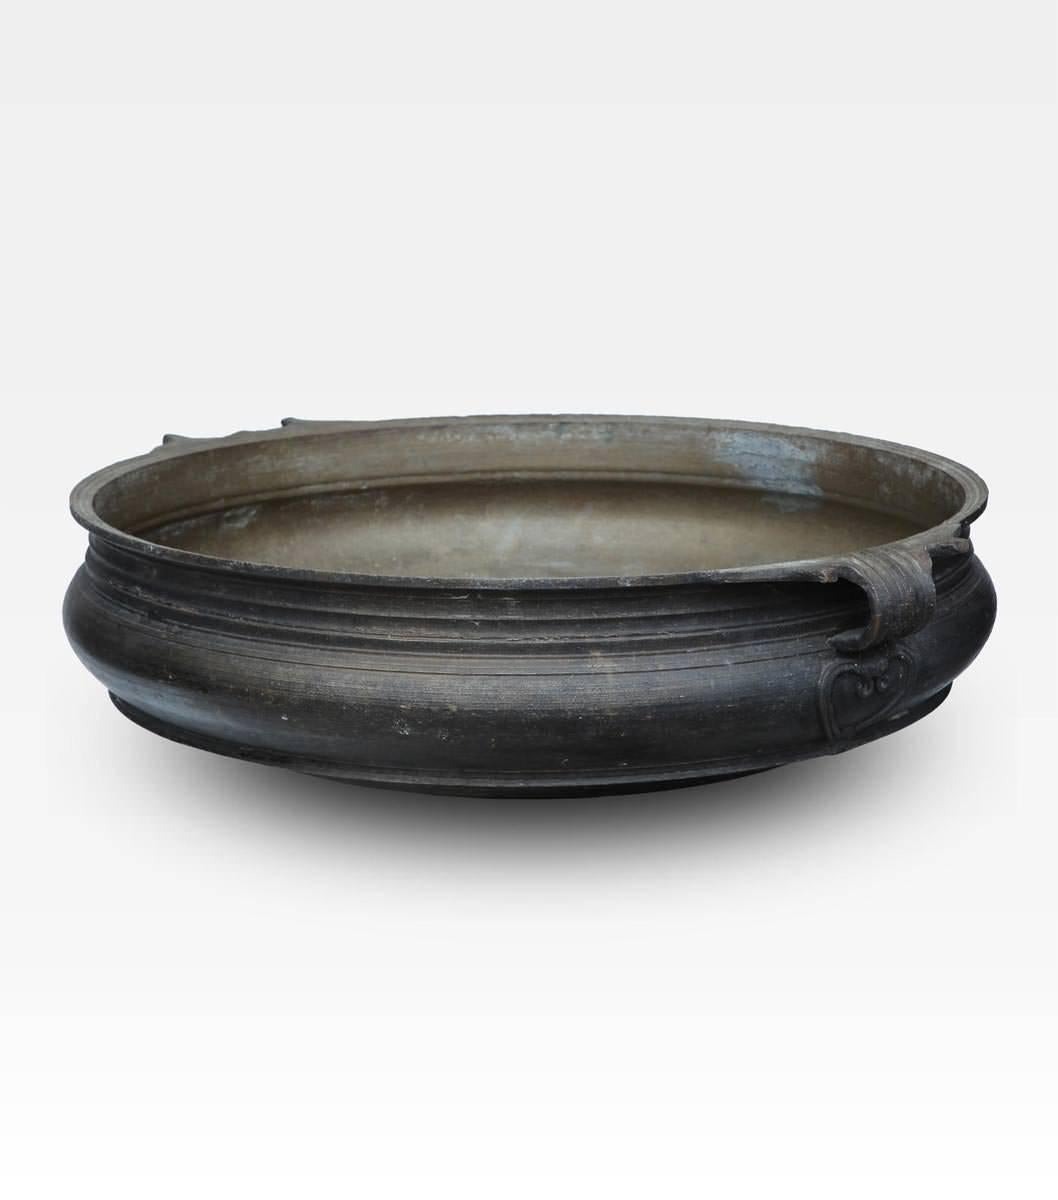 Beautiful Indian basin, it is a precious lost wax bronze casting, originally used for baking Prasada (spiritual food) during kathakali celebration. The bowl is finely decorated also with the round handles which make it even more beautiful. Today it